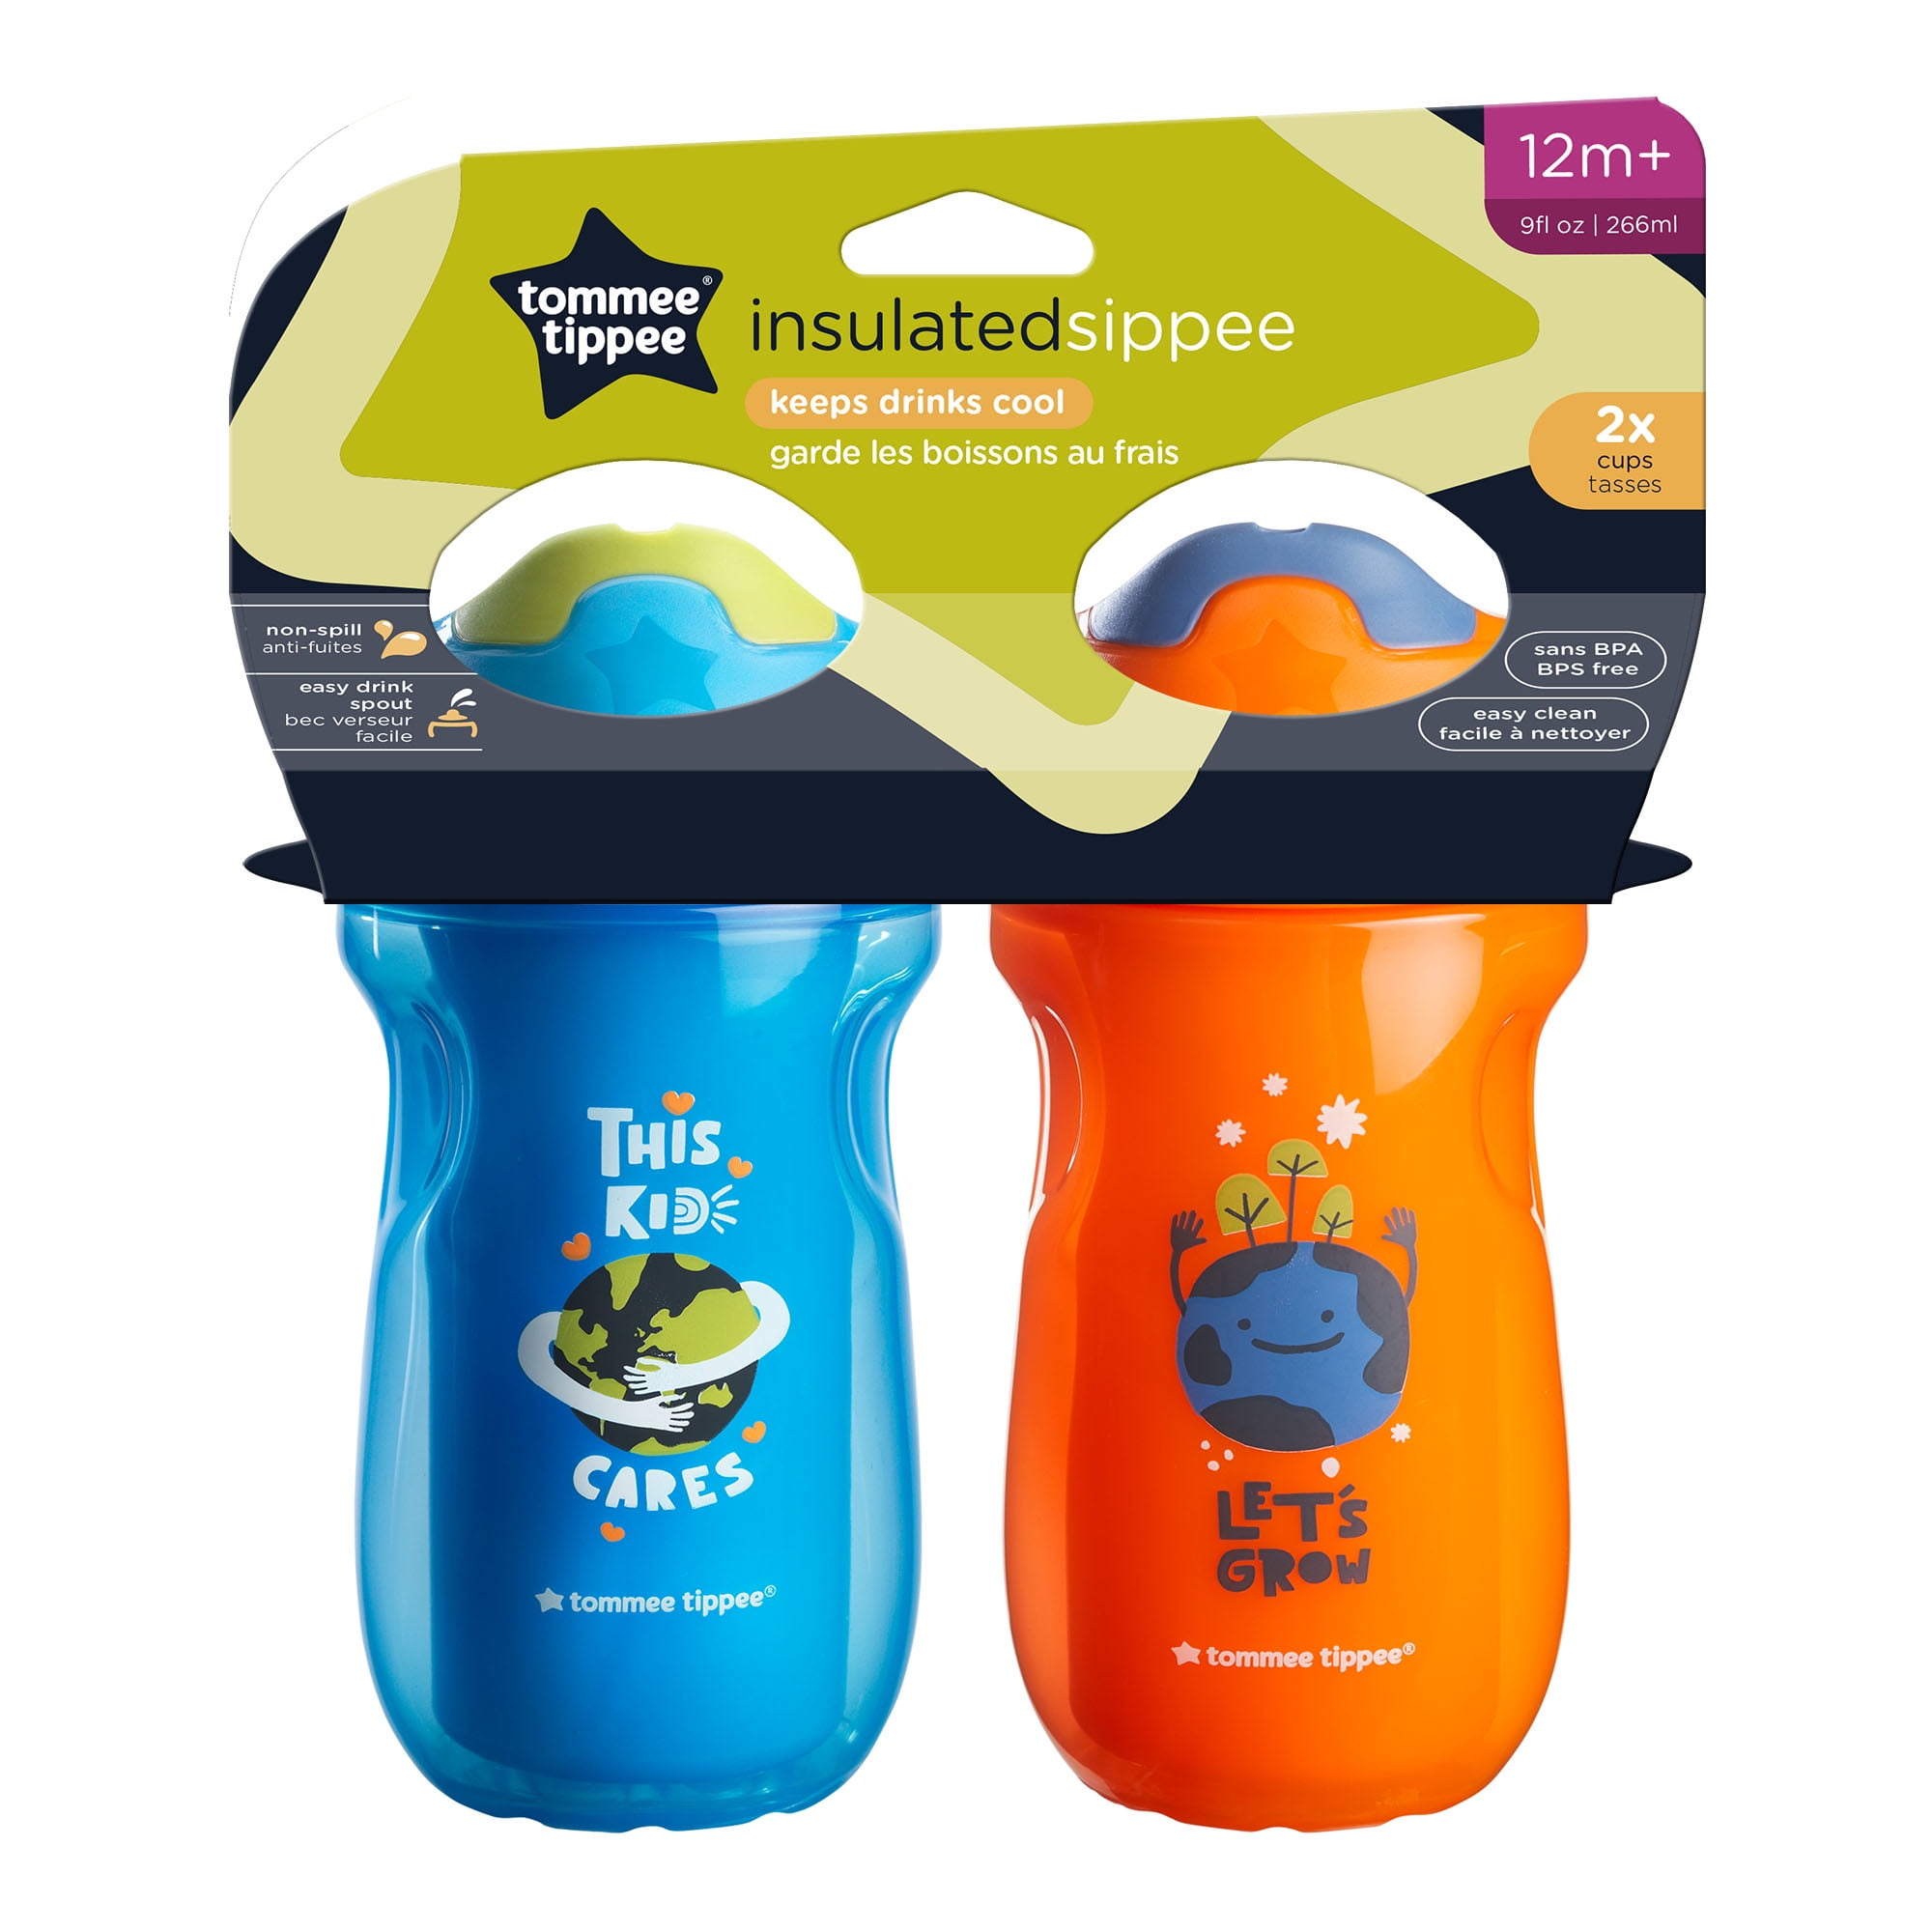 Tommee Tippee Sippy Cup 2-Pack Only $5.96 on